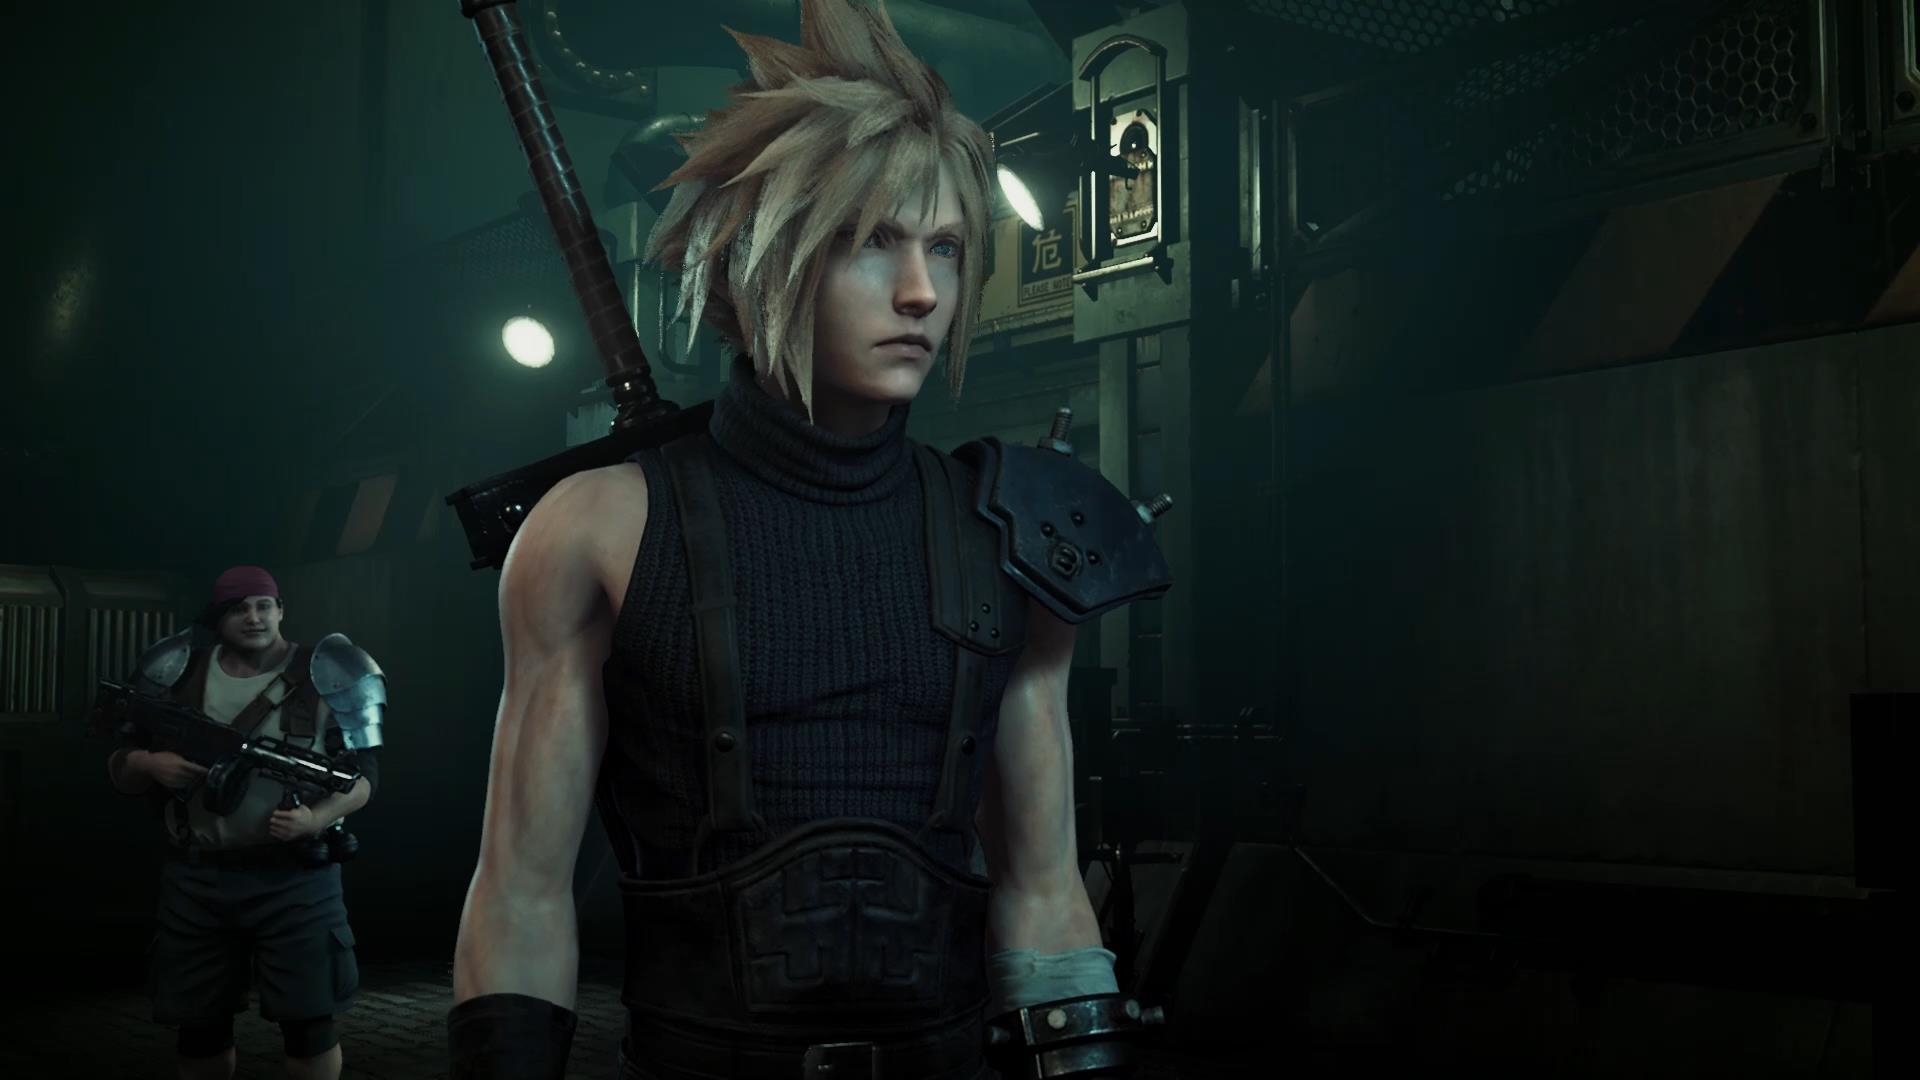 Final Fantasy VII Remake Coming to PS4